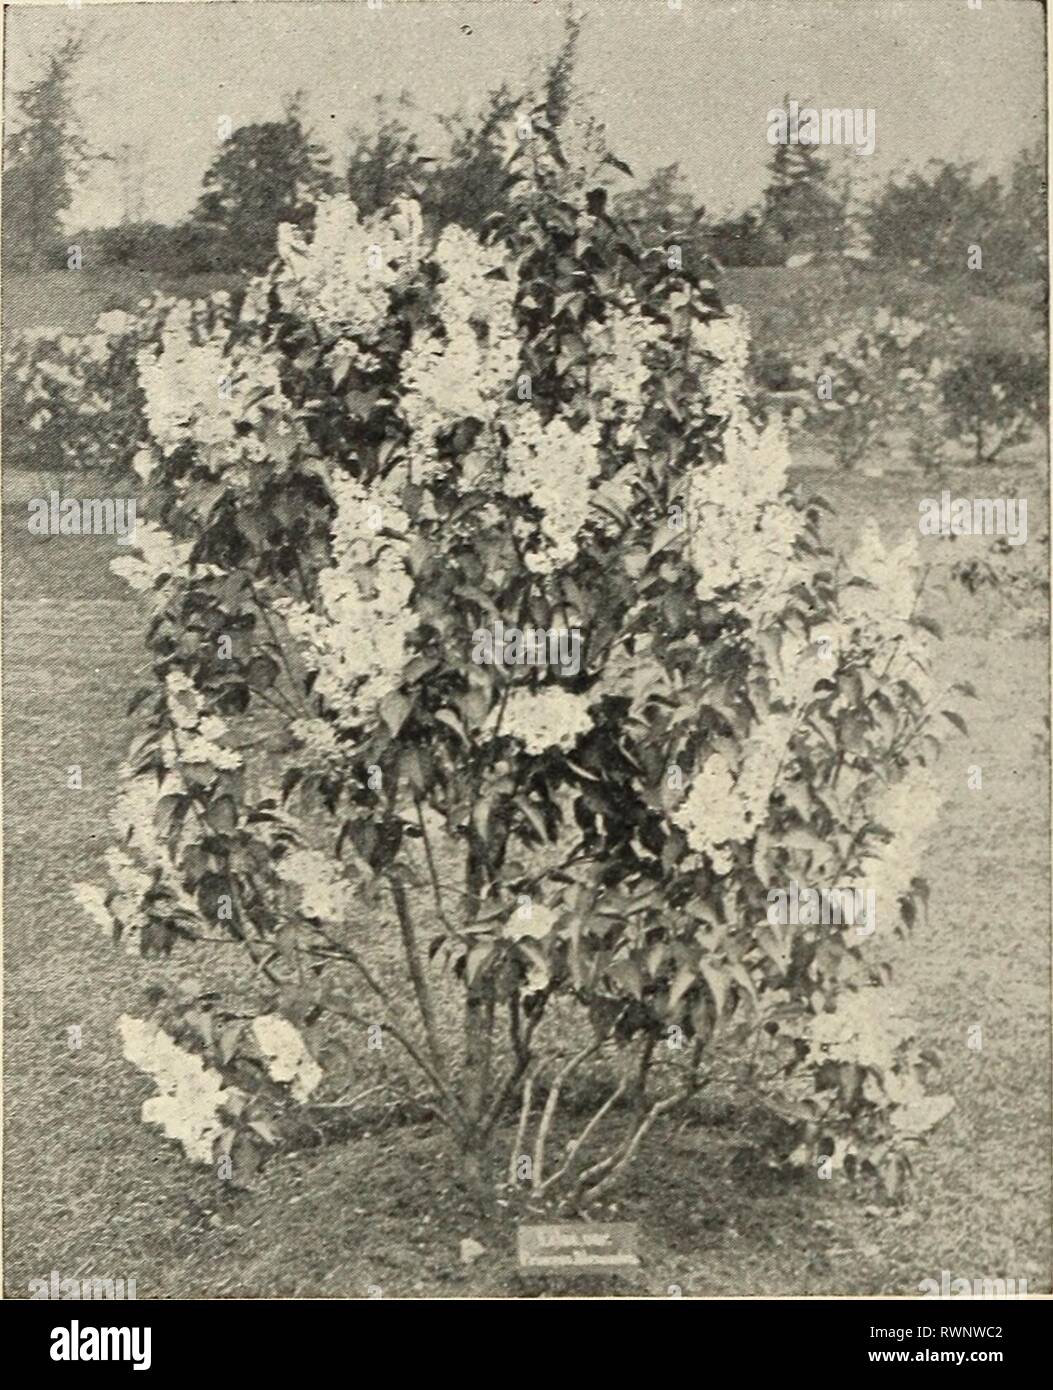 Ellwanger & Barry  Mount Ellwanger & Barry : Mount Hope nurseries ellwangerbarrymo1899moun Year: 1899  86 ELLWANGER &- BARRY'S S3a-inga 1. P. var. pendula. Chinese Weep- ing Lilac. C. A variety of the above, of graceful drooping habit. ;^i.oo. S. Persica. Persian Lilac. C. Native of Persia. From 4 to 6 feet high, -with small foliage and bright purple flowers. 50c. var. alba. White Persian Lilac. D. Delicate white fragrant flowers, shaded with purple. A superb variety. Rare. ^i.oo. S. rothomagensis var. rubra. Rouen Lilac. C. A distinct hybrid variety, with red- dish flowers ; panicles of great Stock Photo